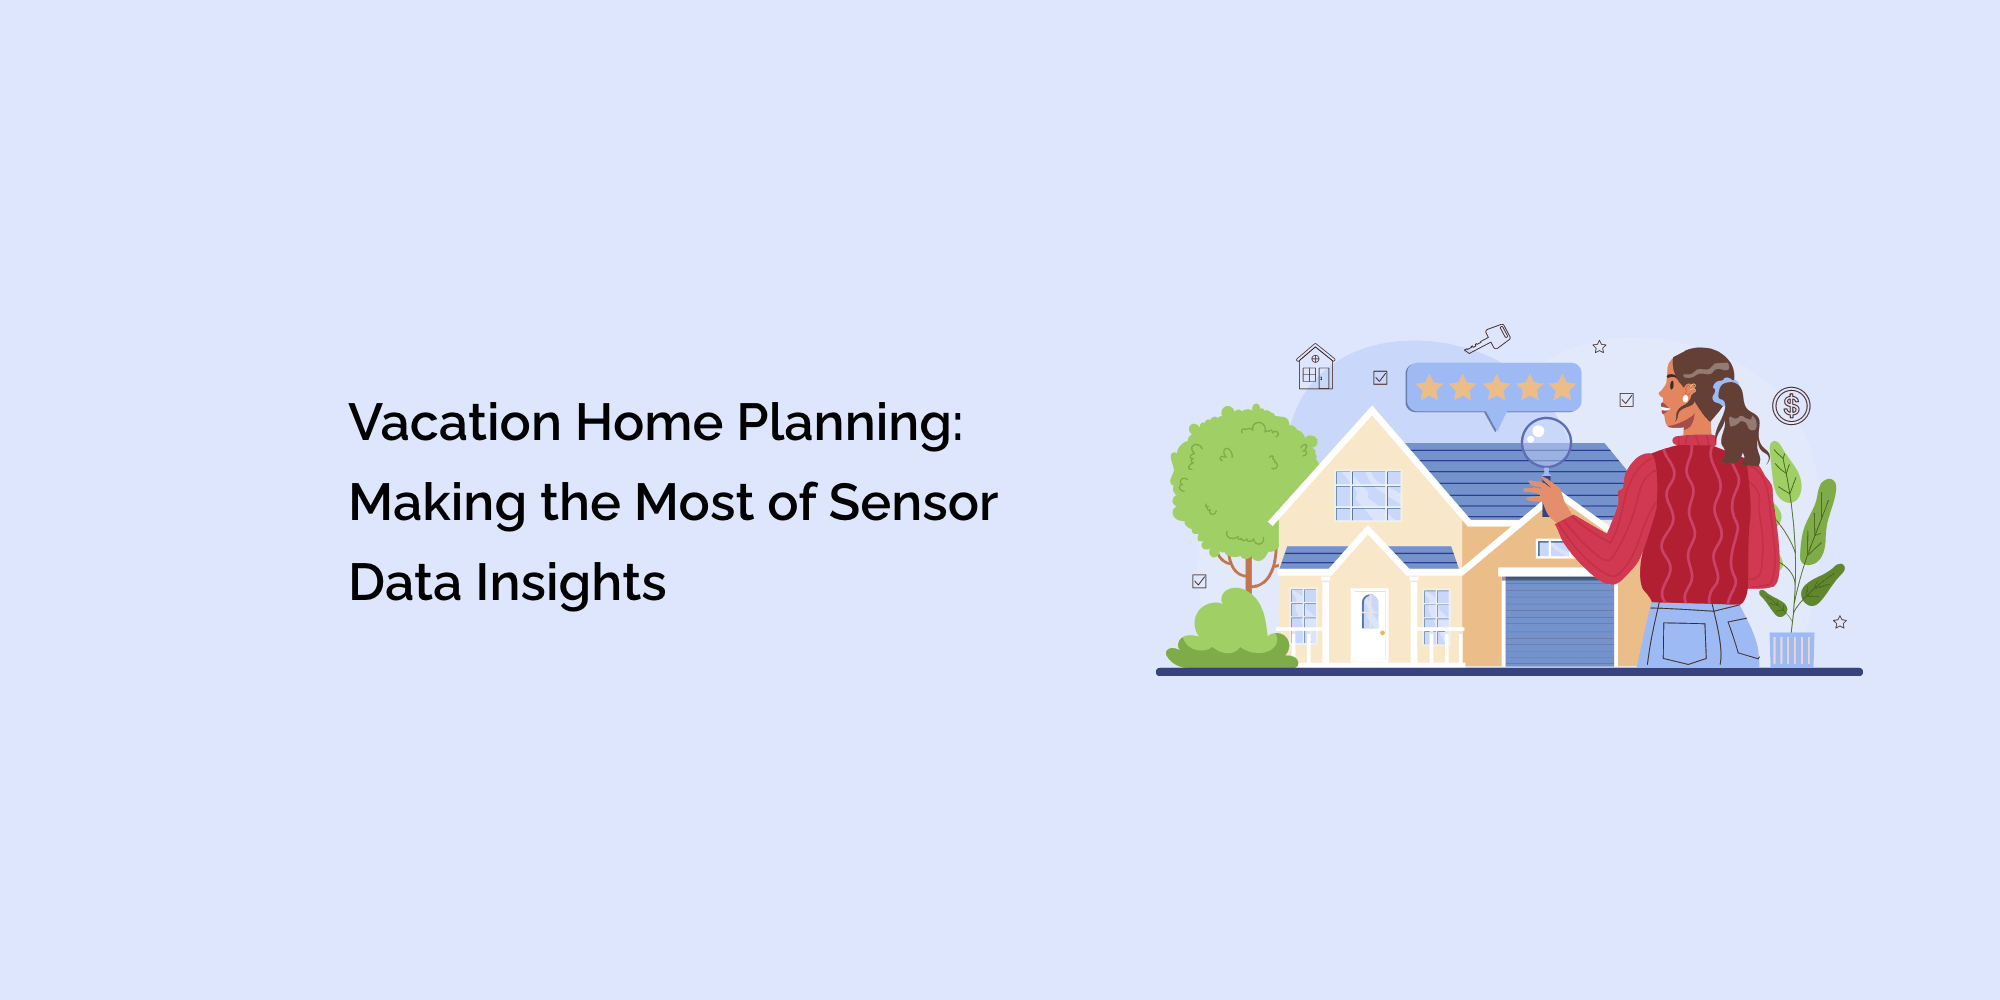 Vacation Home Planning: Making the Most of Sensor Data Insights